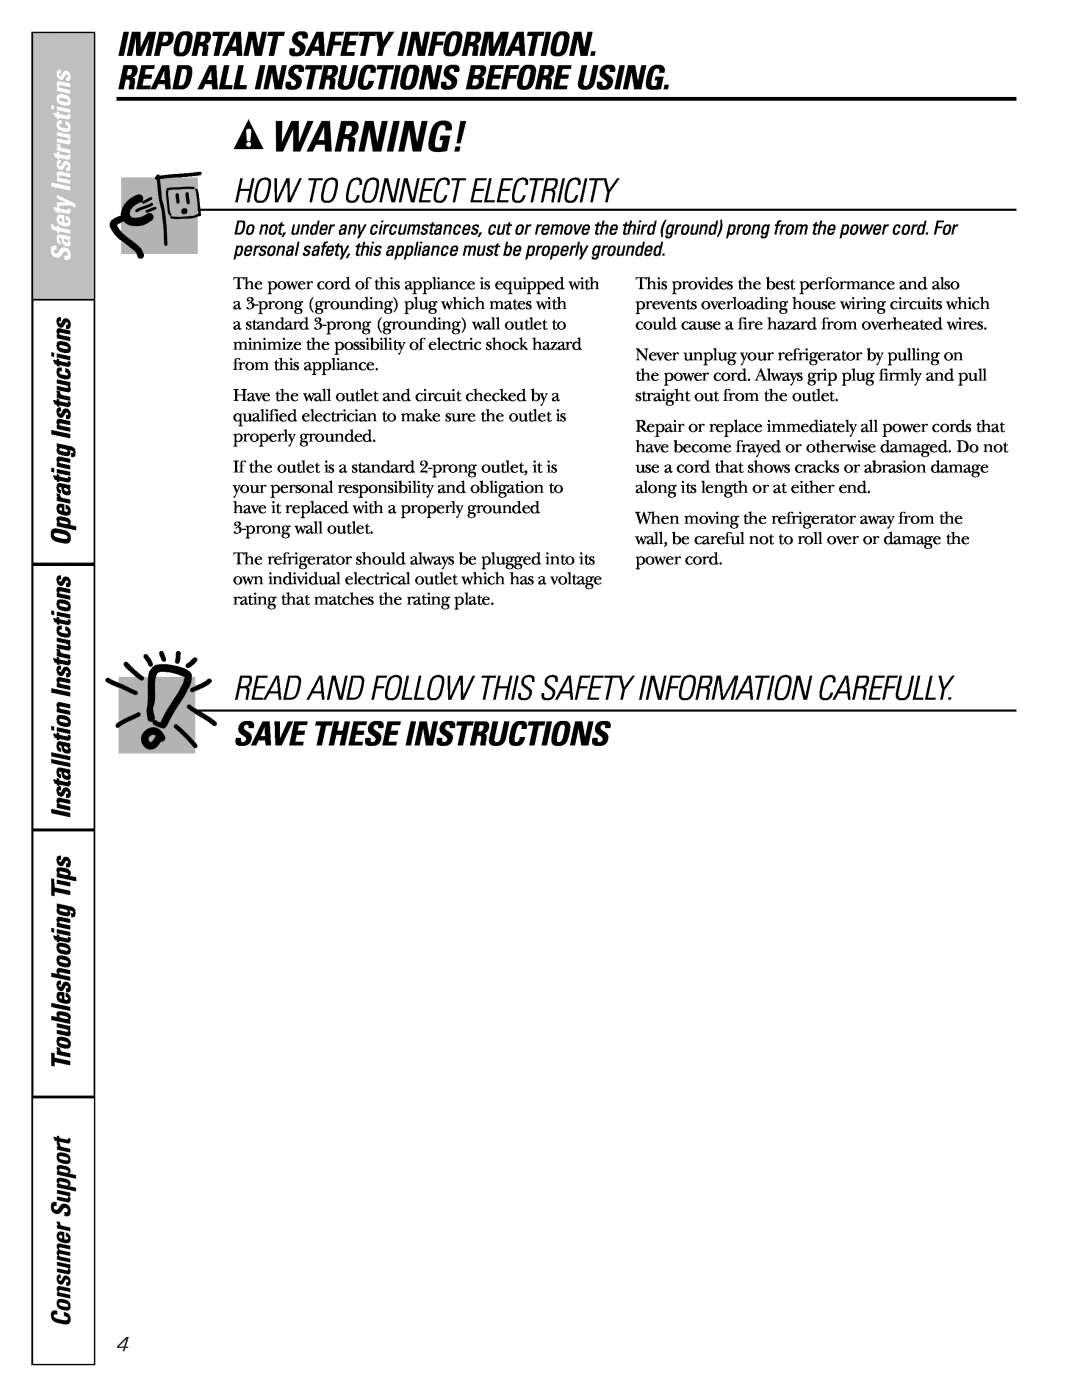 GE 25 and 27 How To Connect Electricity, Save These Instructions, Instructions Operating Instructions, Safety Instructions 